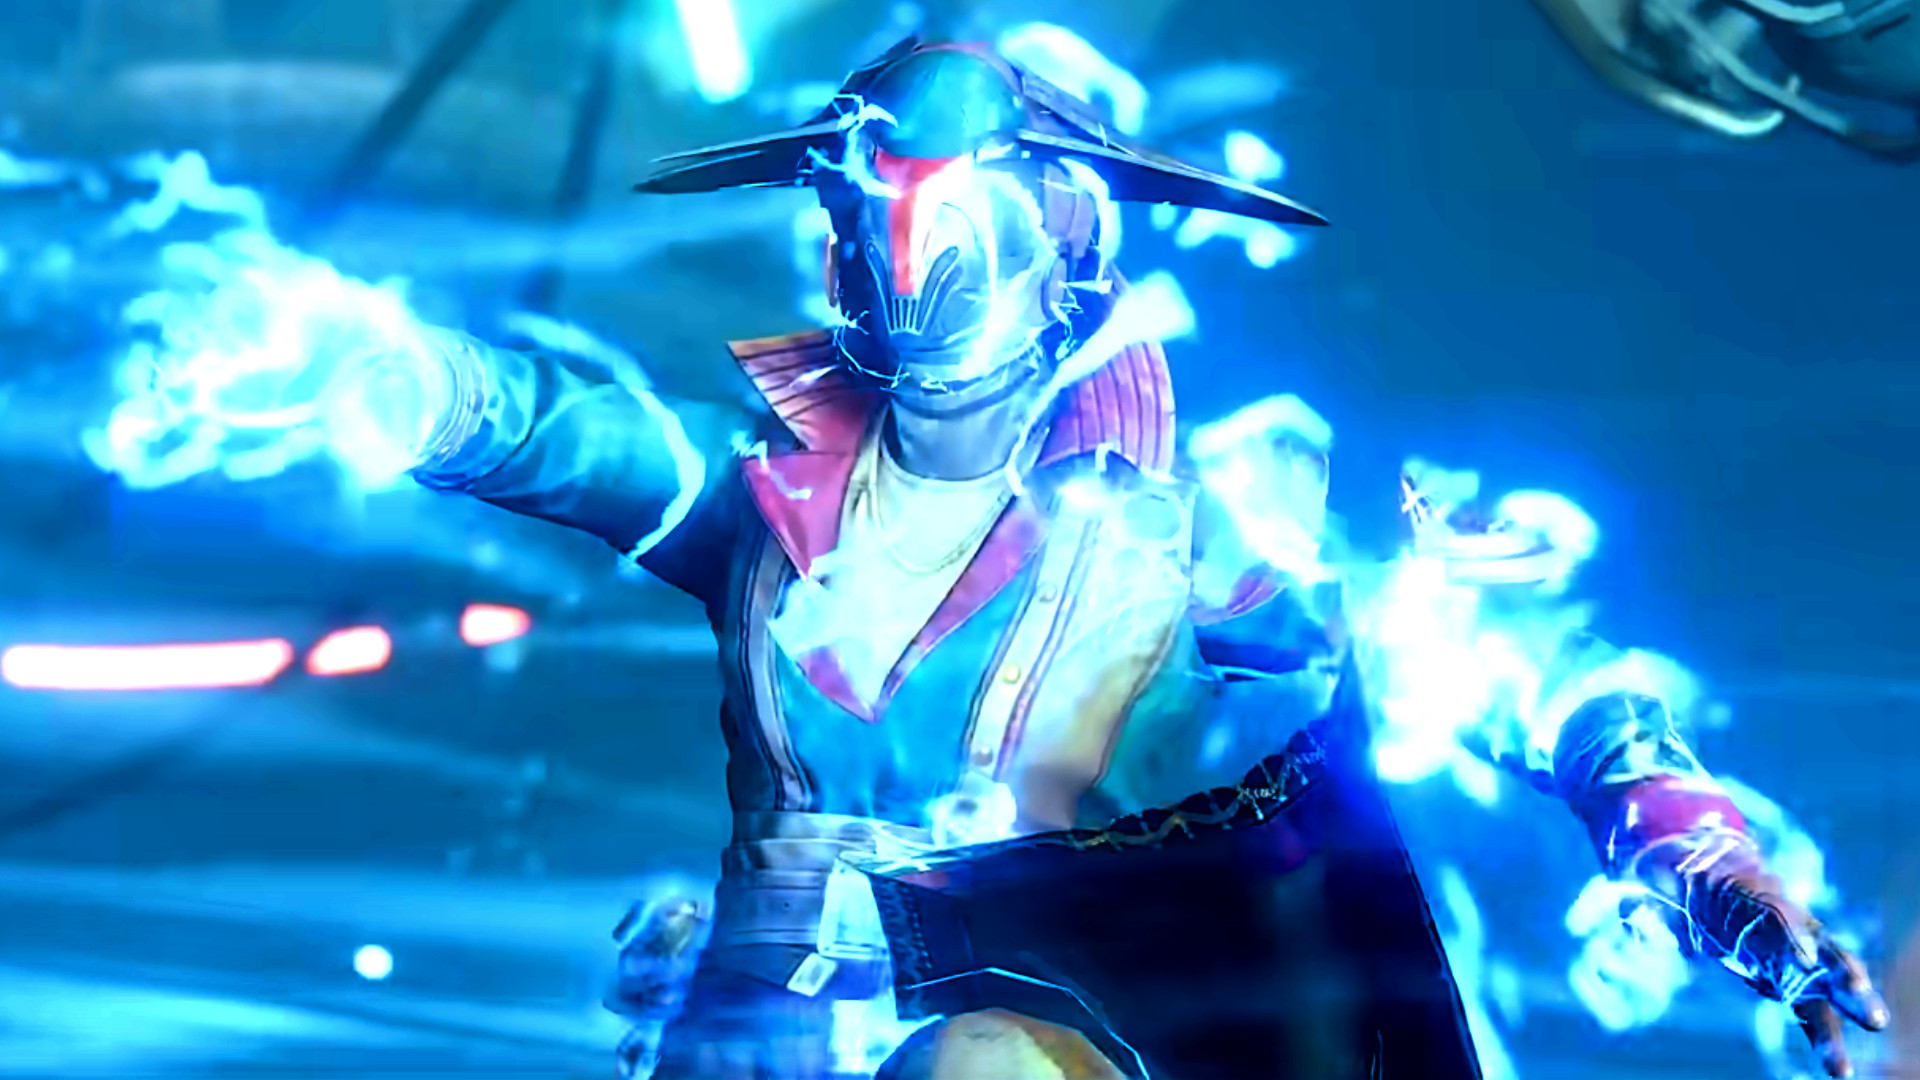 Destiny 2 Arc 3.0 is missing that special spark, say fans